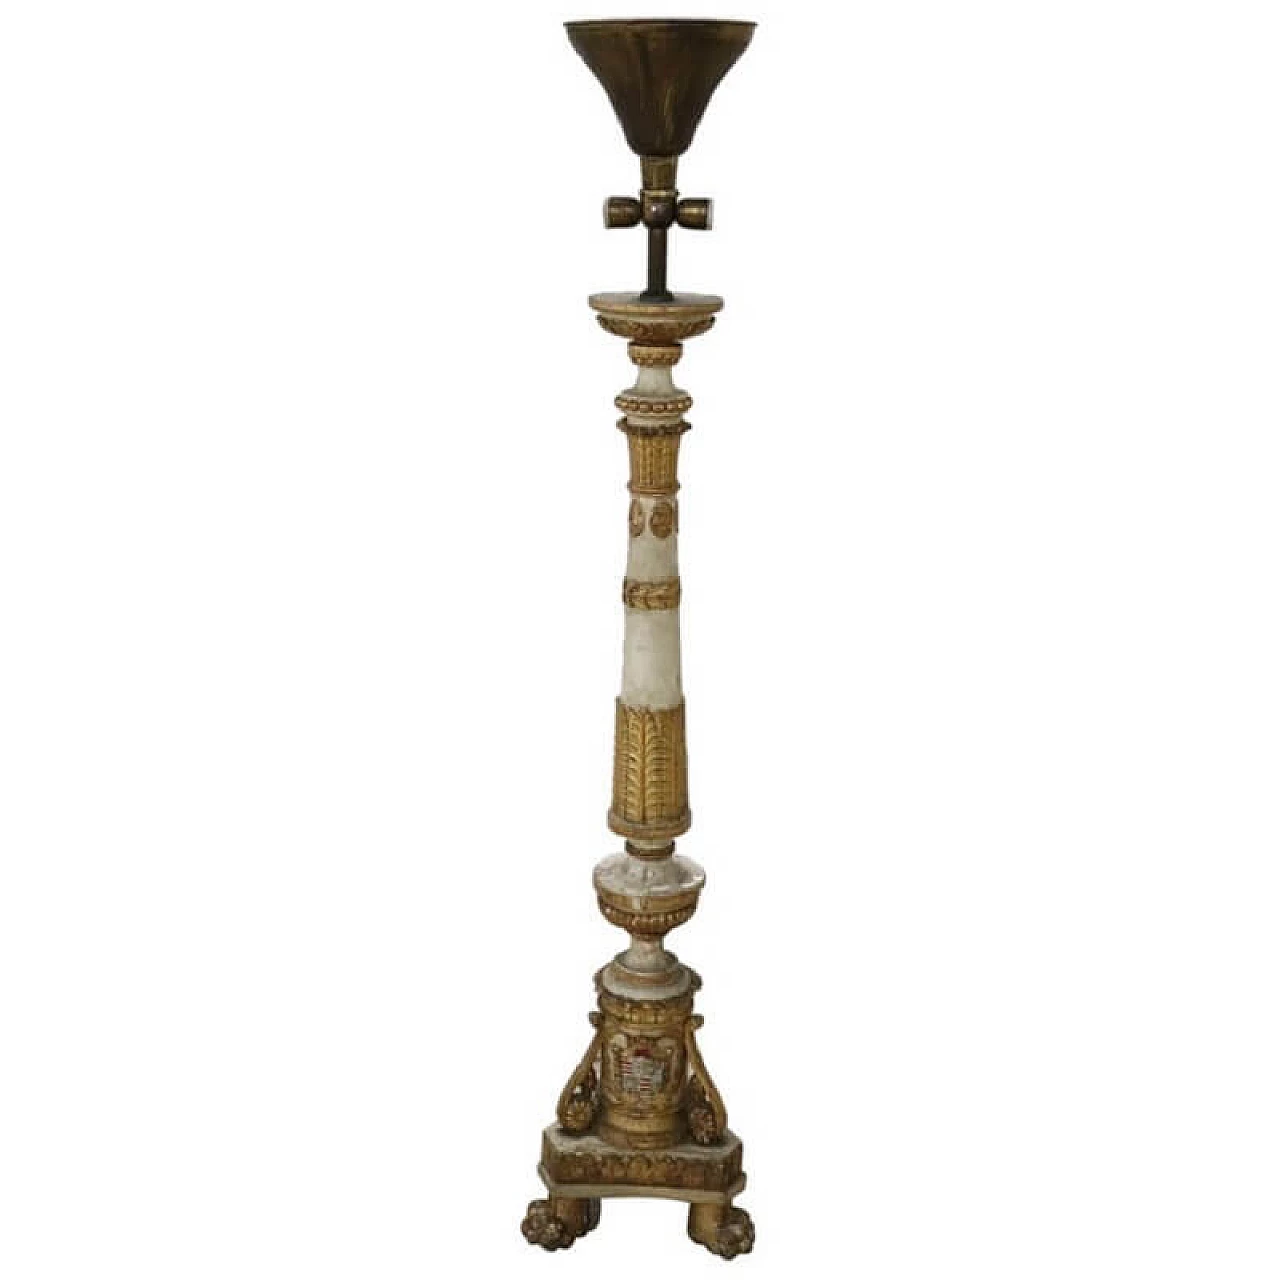 Antique candlestick in lacquered and gilded wood, electrified Empire period, early nineteenth century. 1068707